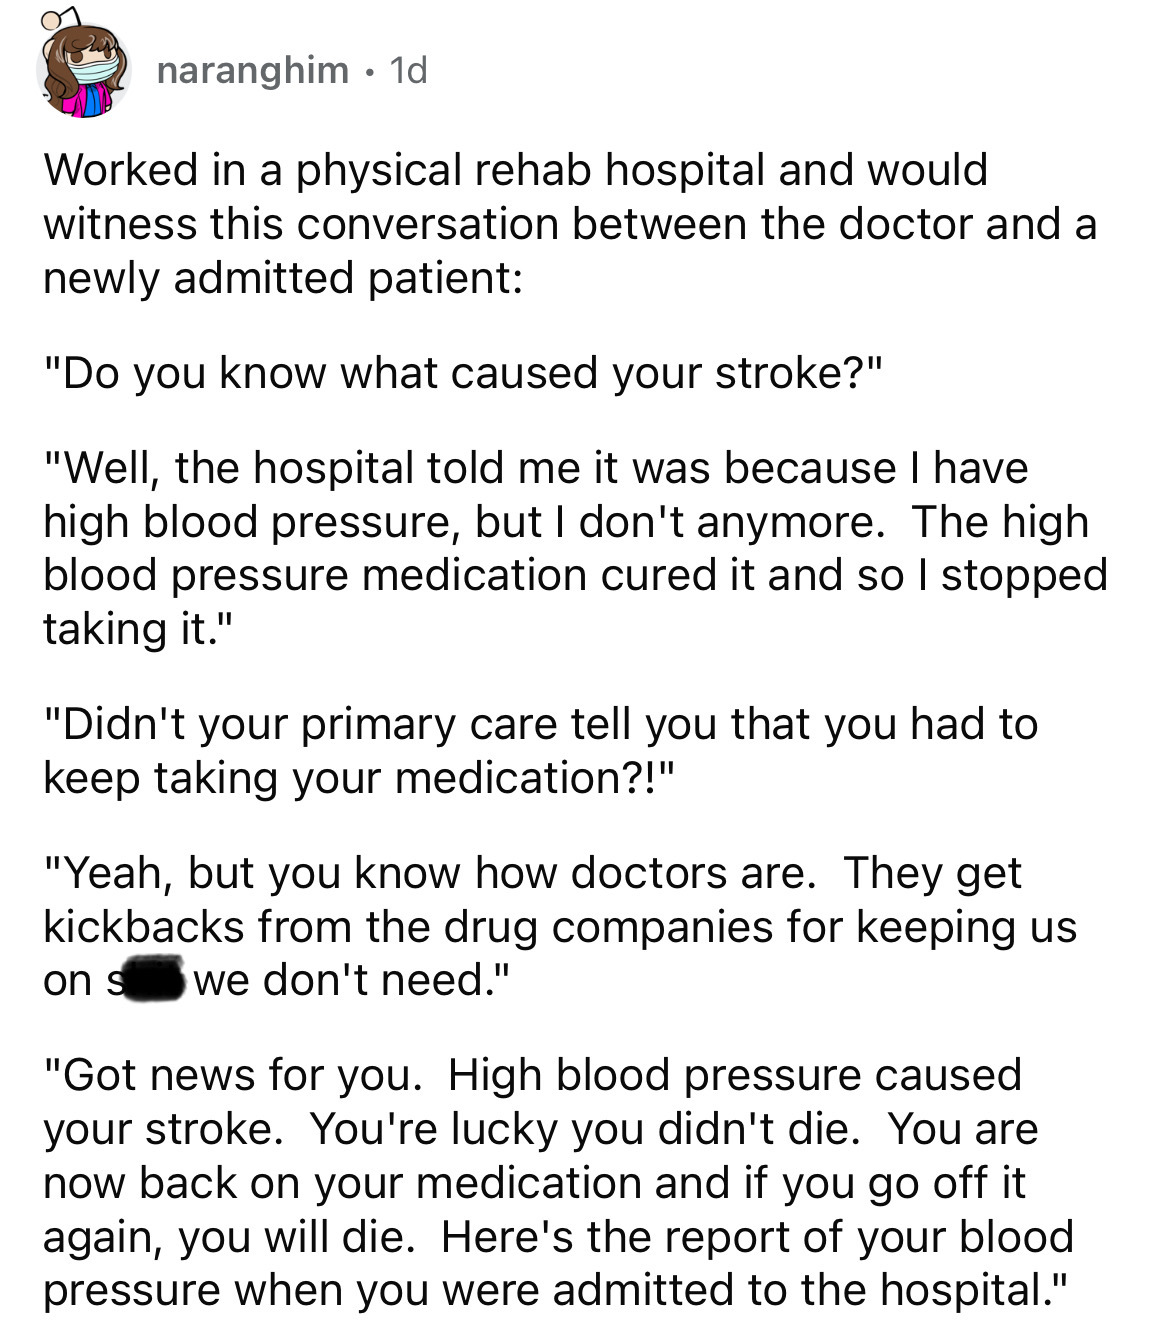 screenshot - naranghim 1d Worked in a physical rehab hospital and would witness this conversation between the doctor and a newly admitted patient "Do you know what caused your stroke?" "Well, the hospital told me it was because I have high blood pressure,